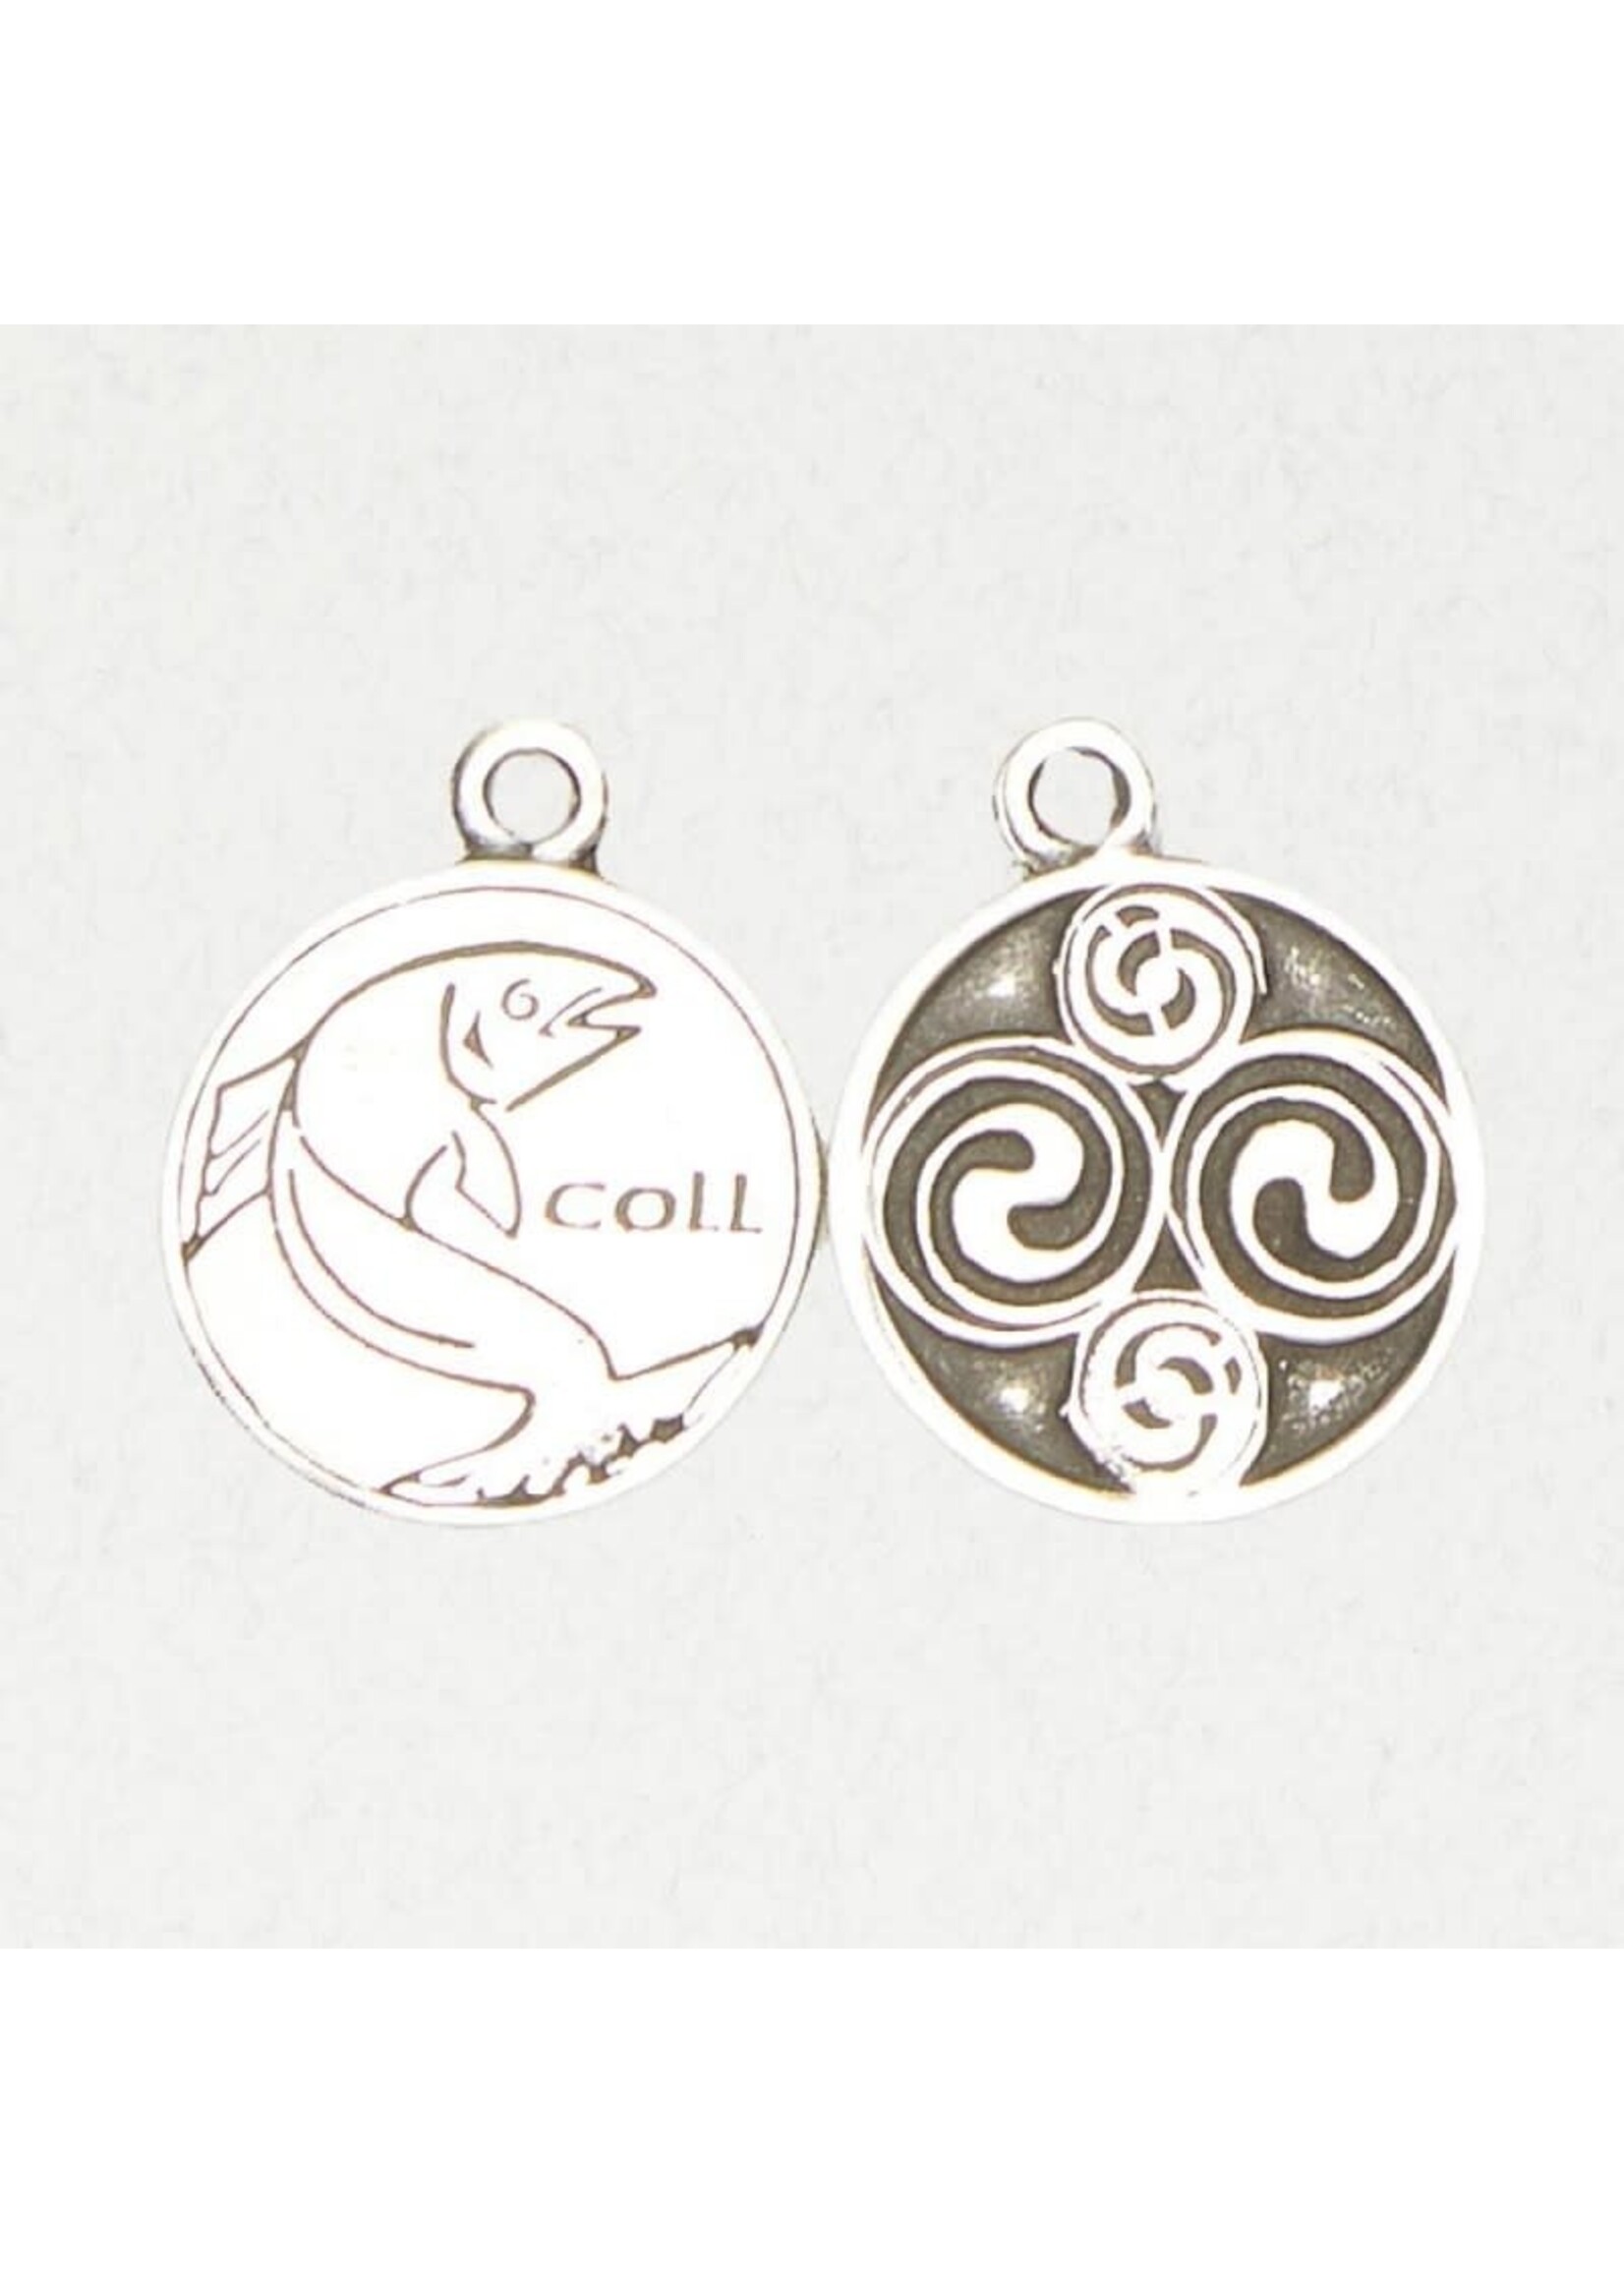 Celtic Astrology Pewter Pendant - Coll